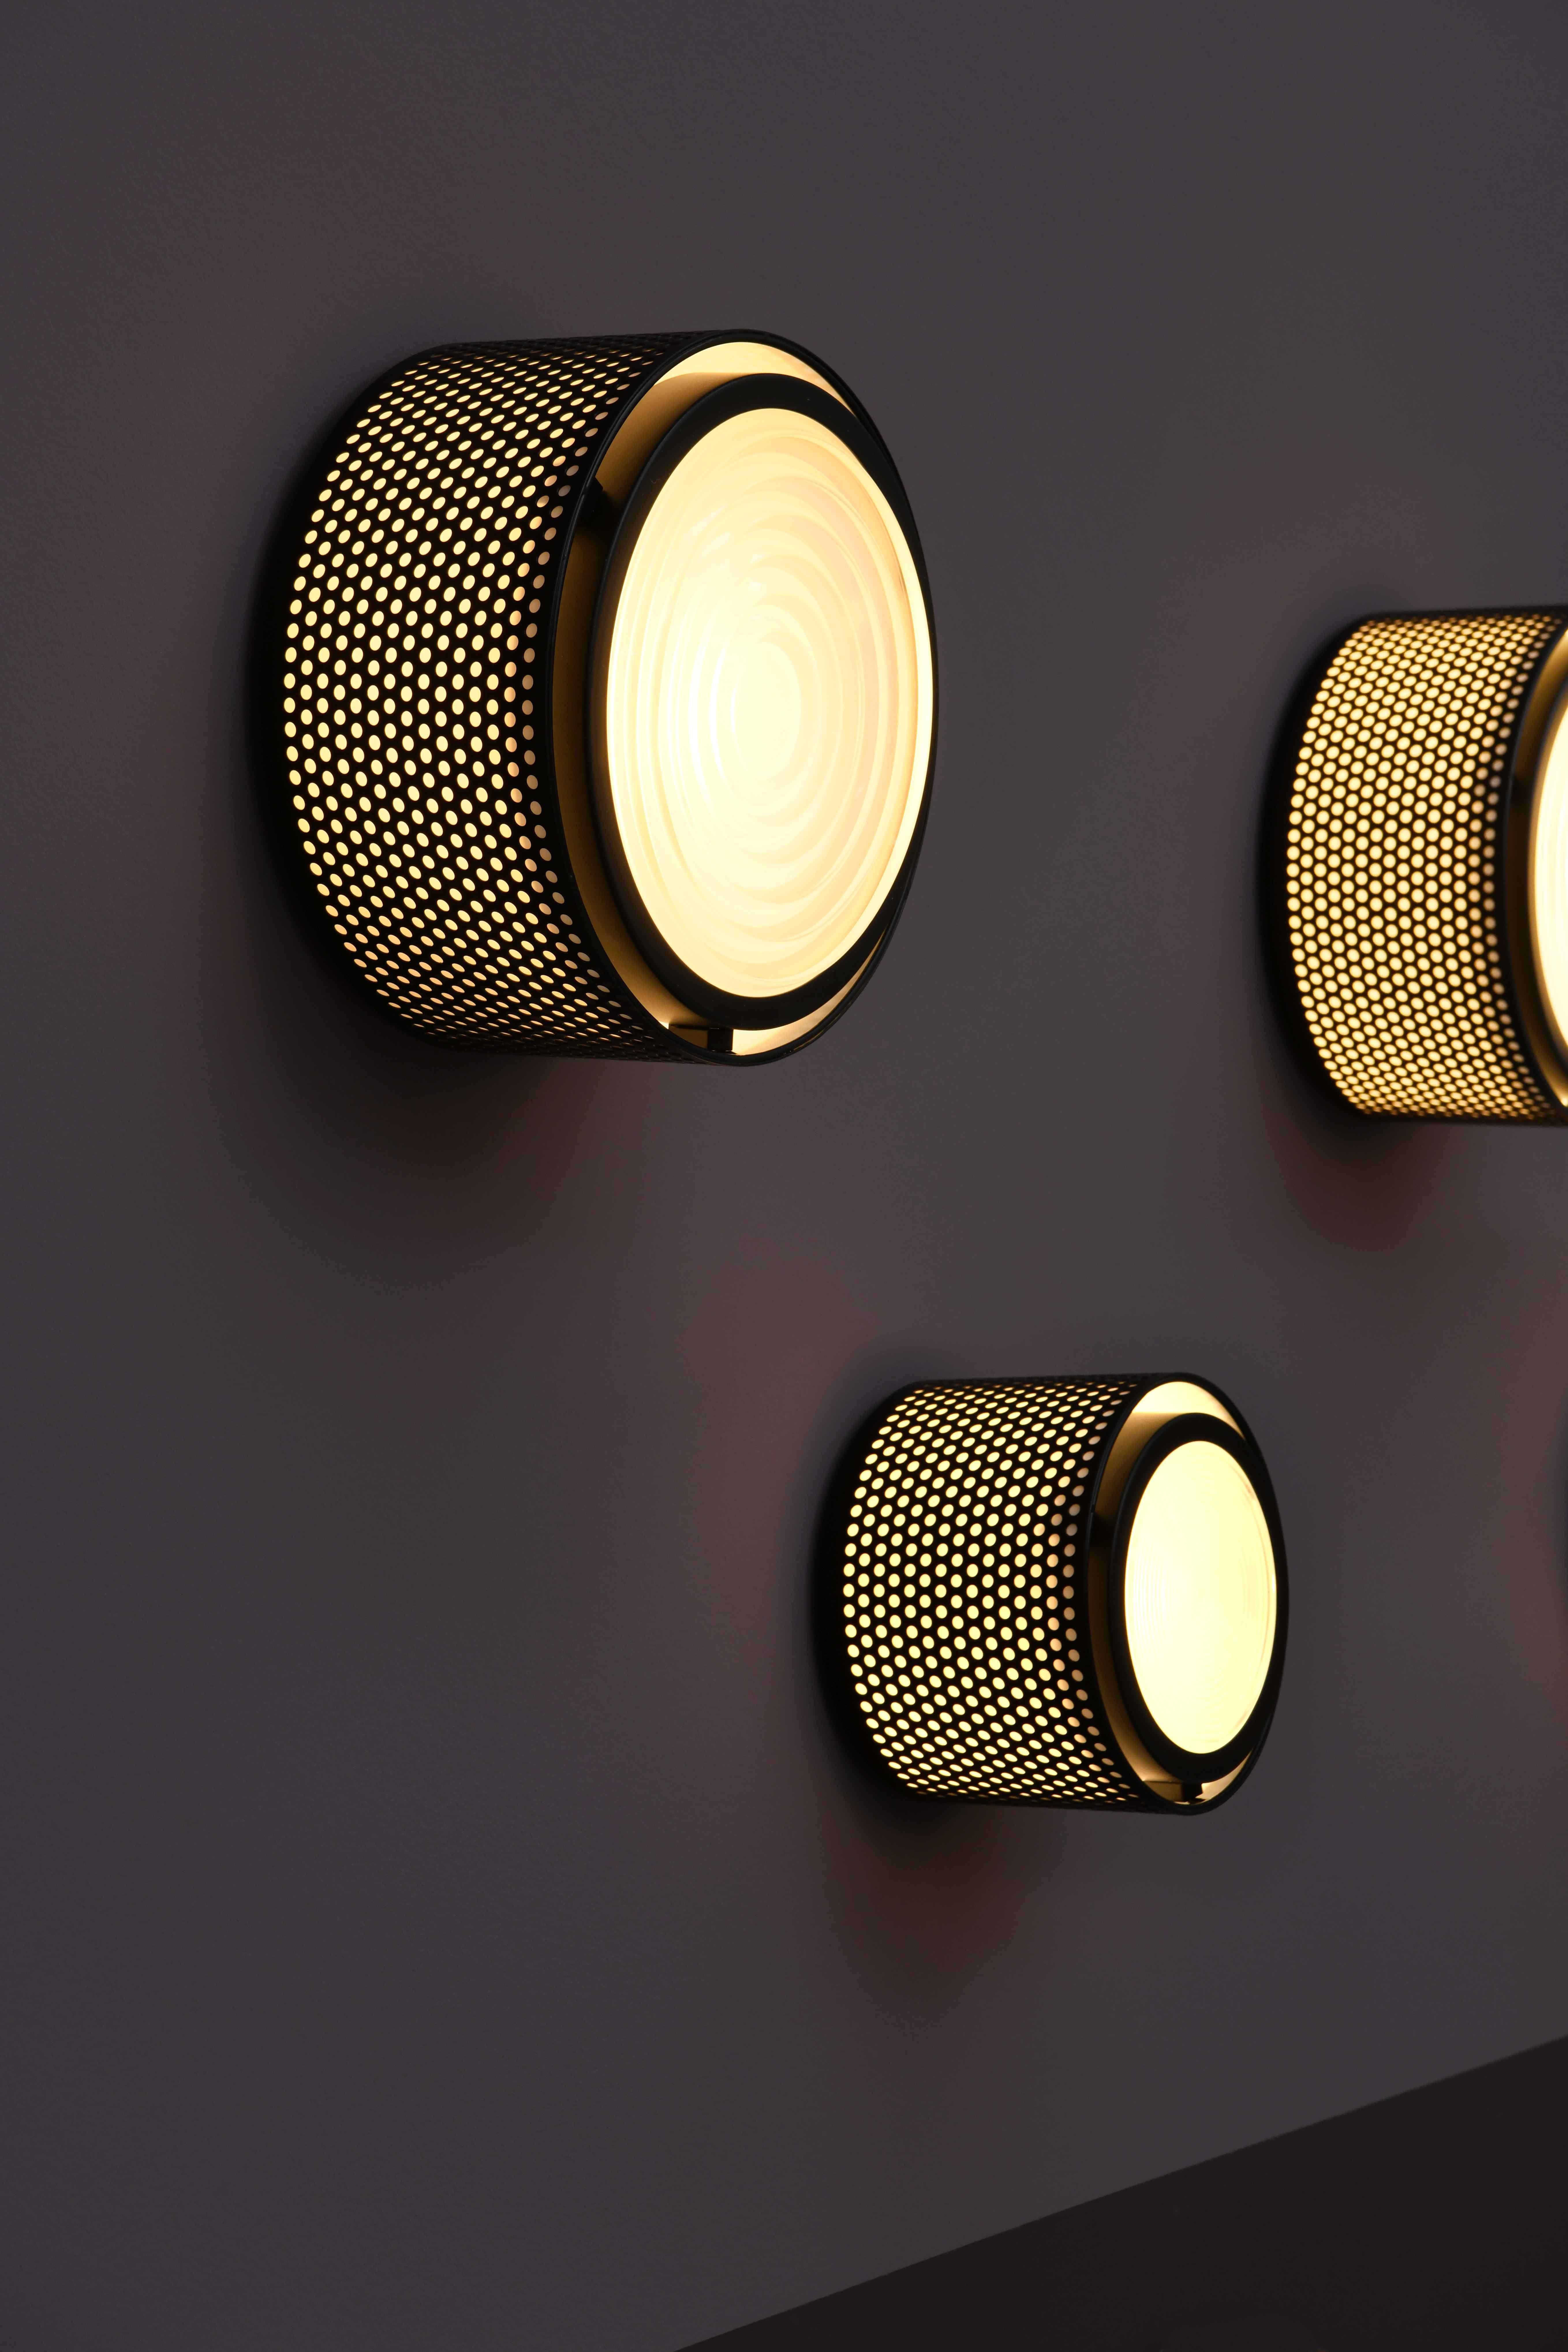 Pierre Guariche 'G13' wall or ceiling light for Sammode Studio in black. 

Originally designed by Pierre Guariche, this iconic lamp is newly produced in an authorized re-edition by Sammode Studio in France embracing many of the same small-scale